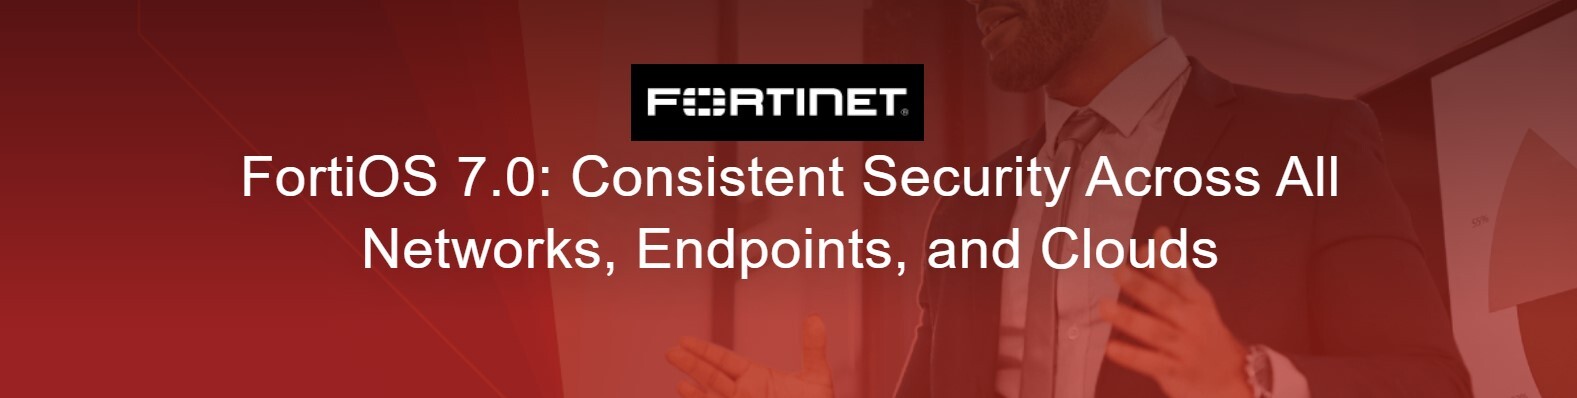 Fortinet Delivers SASE and Zero Trust Network Access Capabilities with Major Updates to its FortiOS Operating System